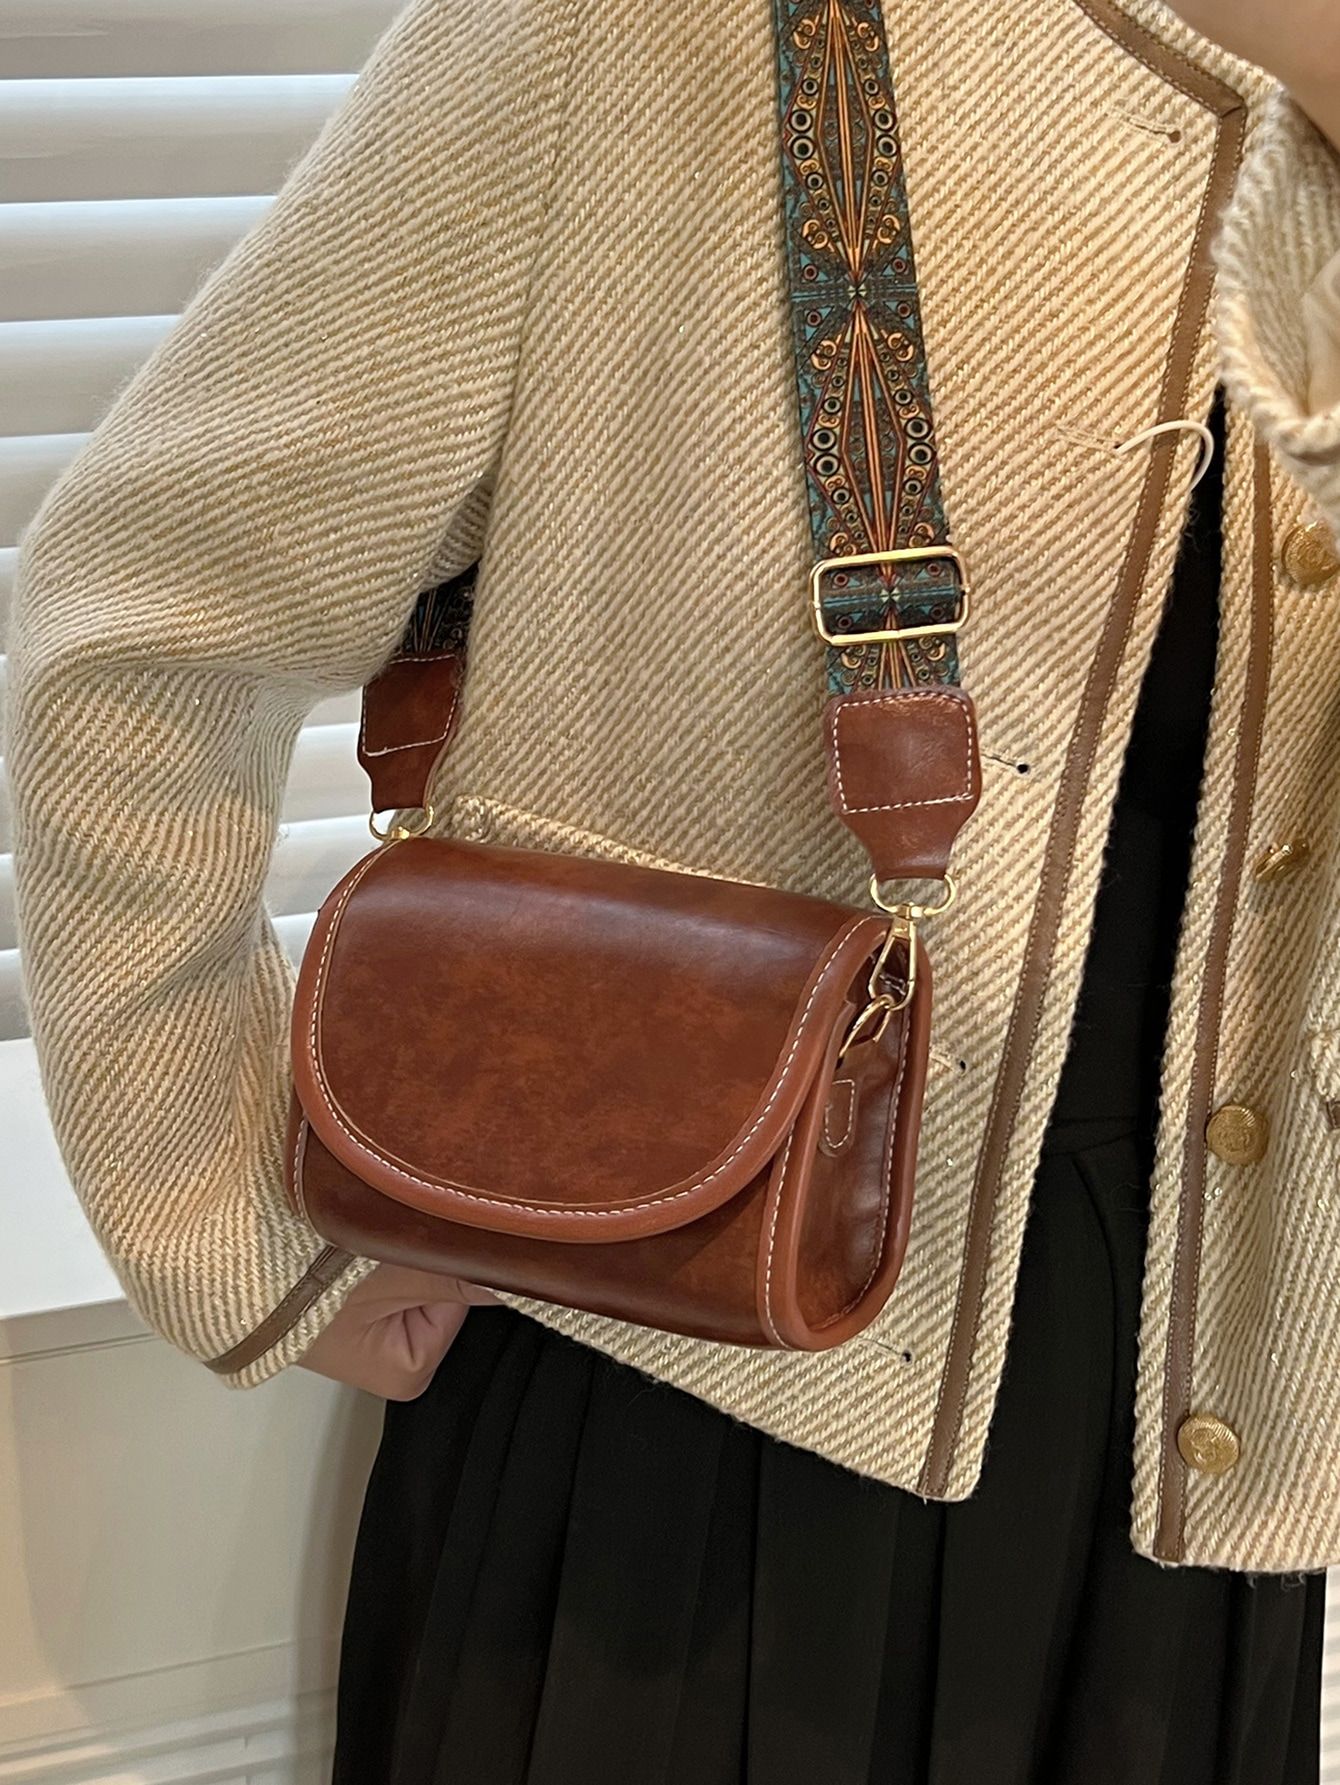 Most in demand: leather purse